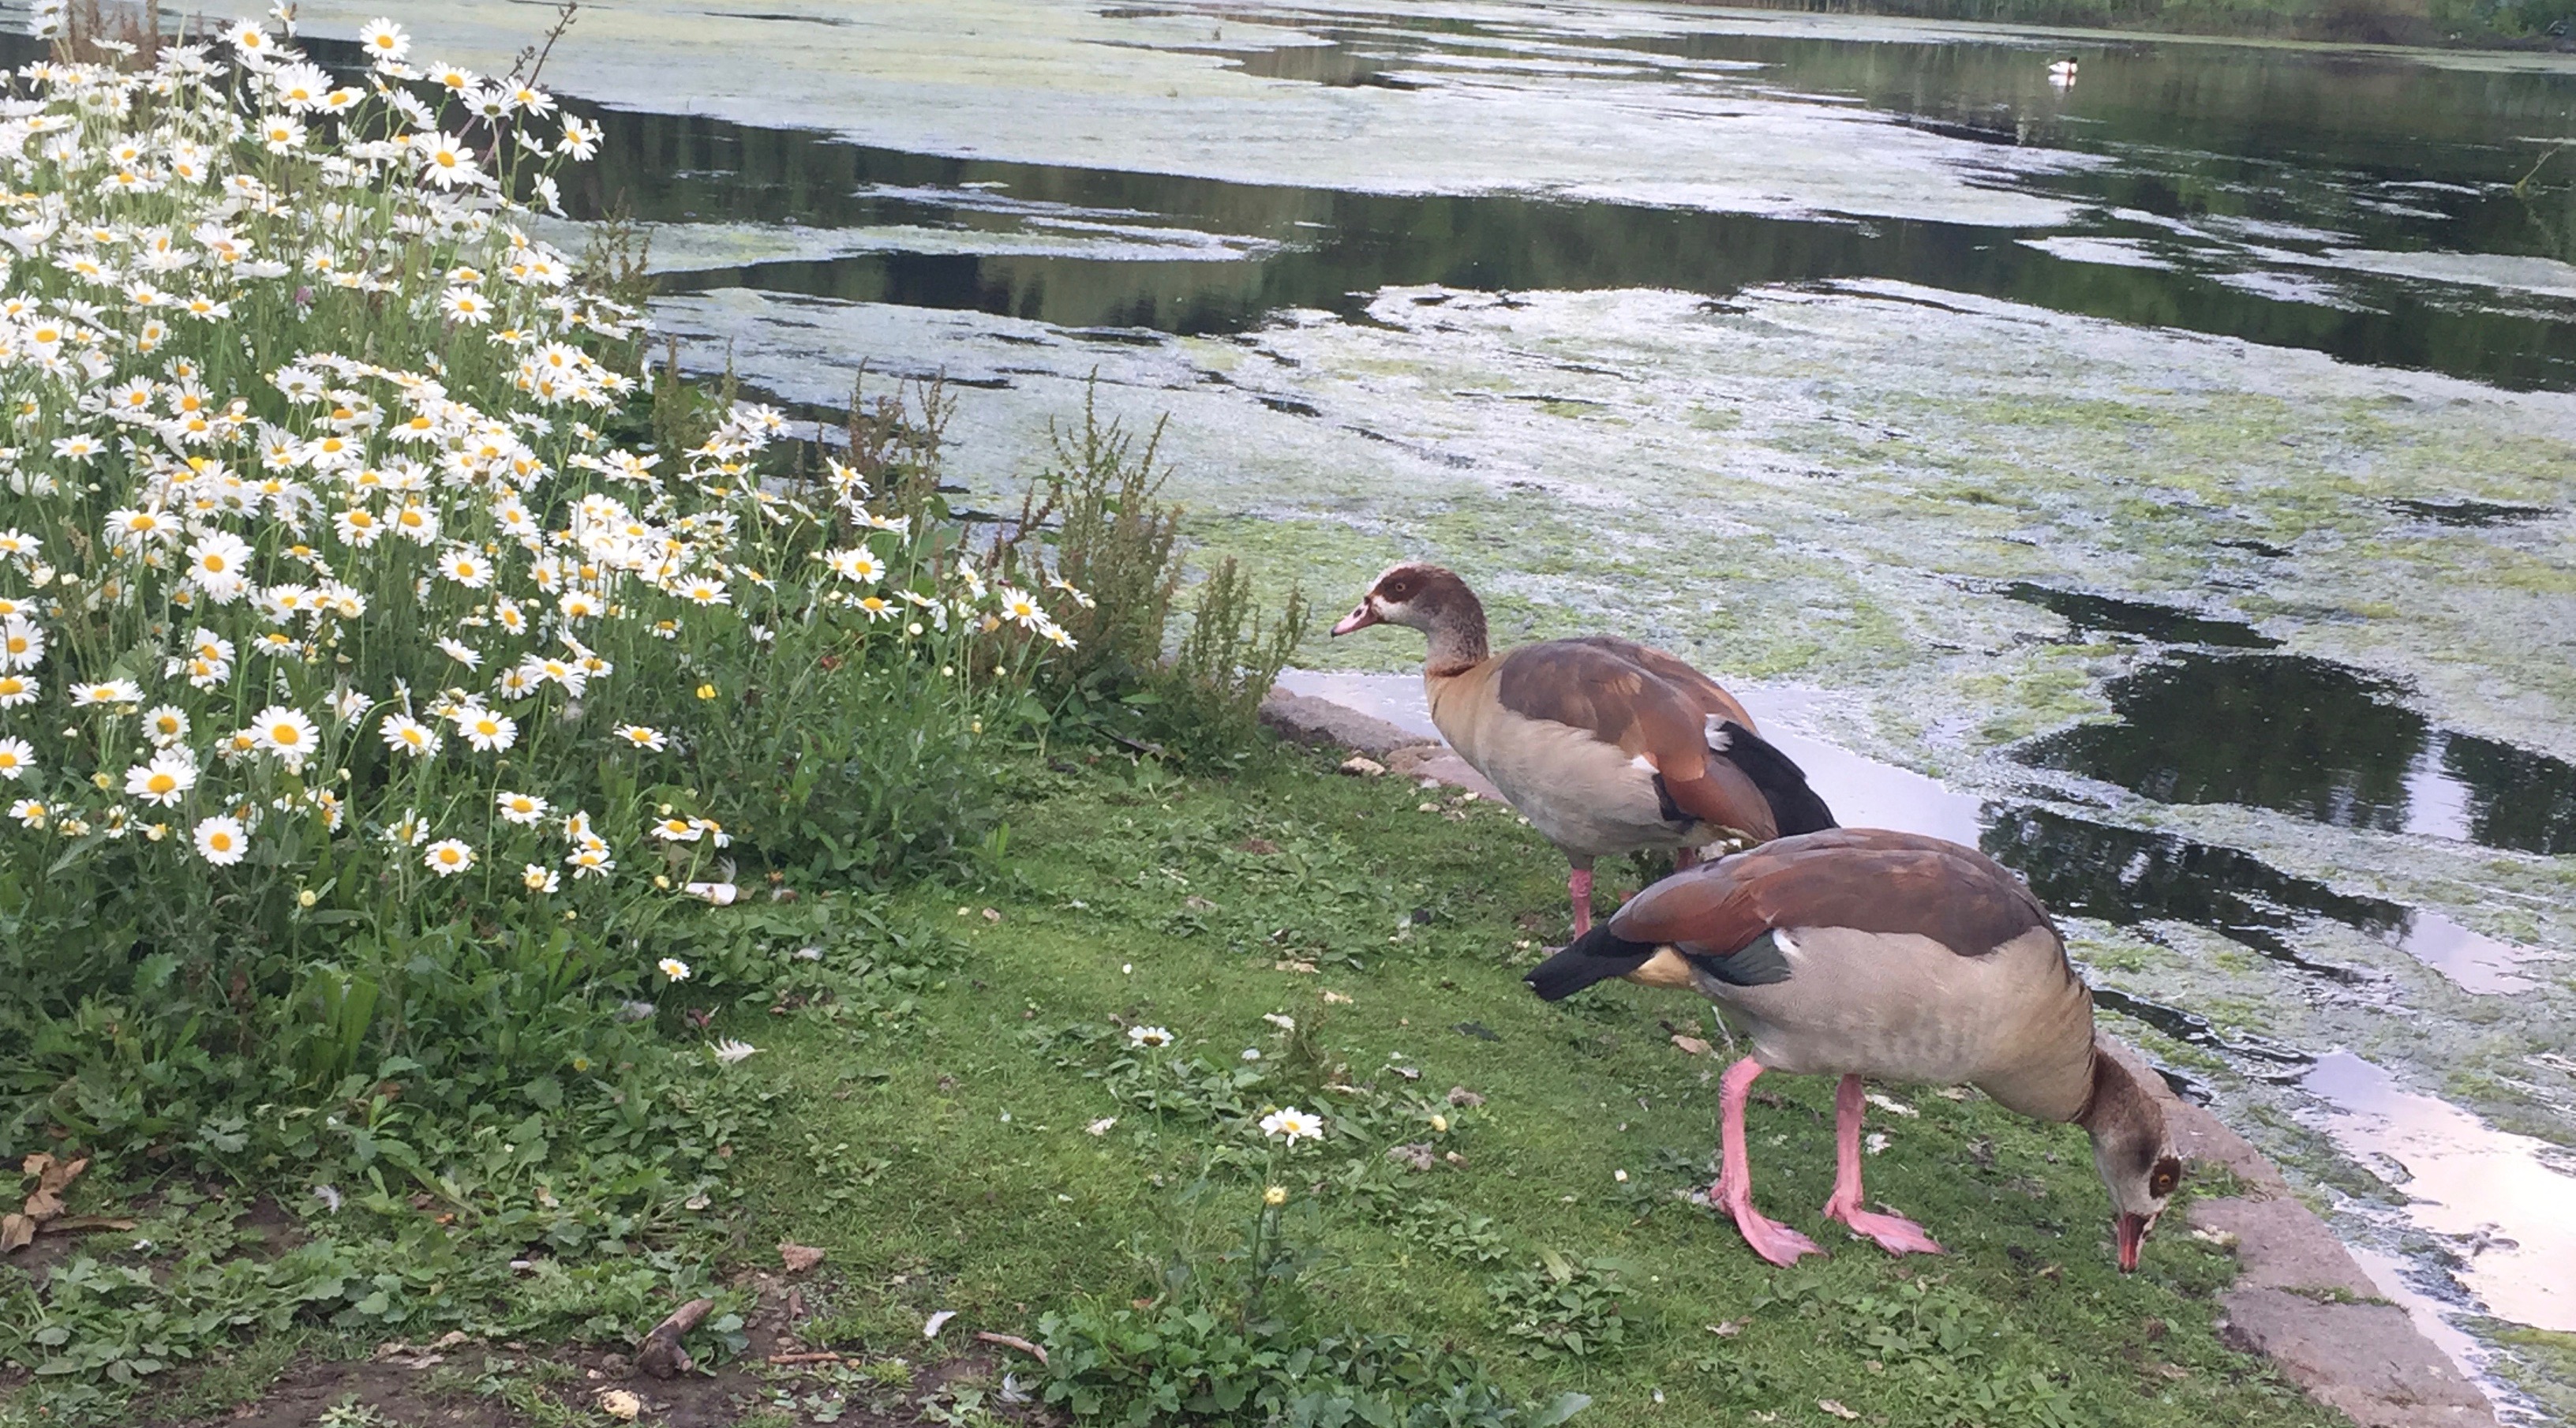 Two Egyptian geese eating grass near a patch of daisies